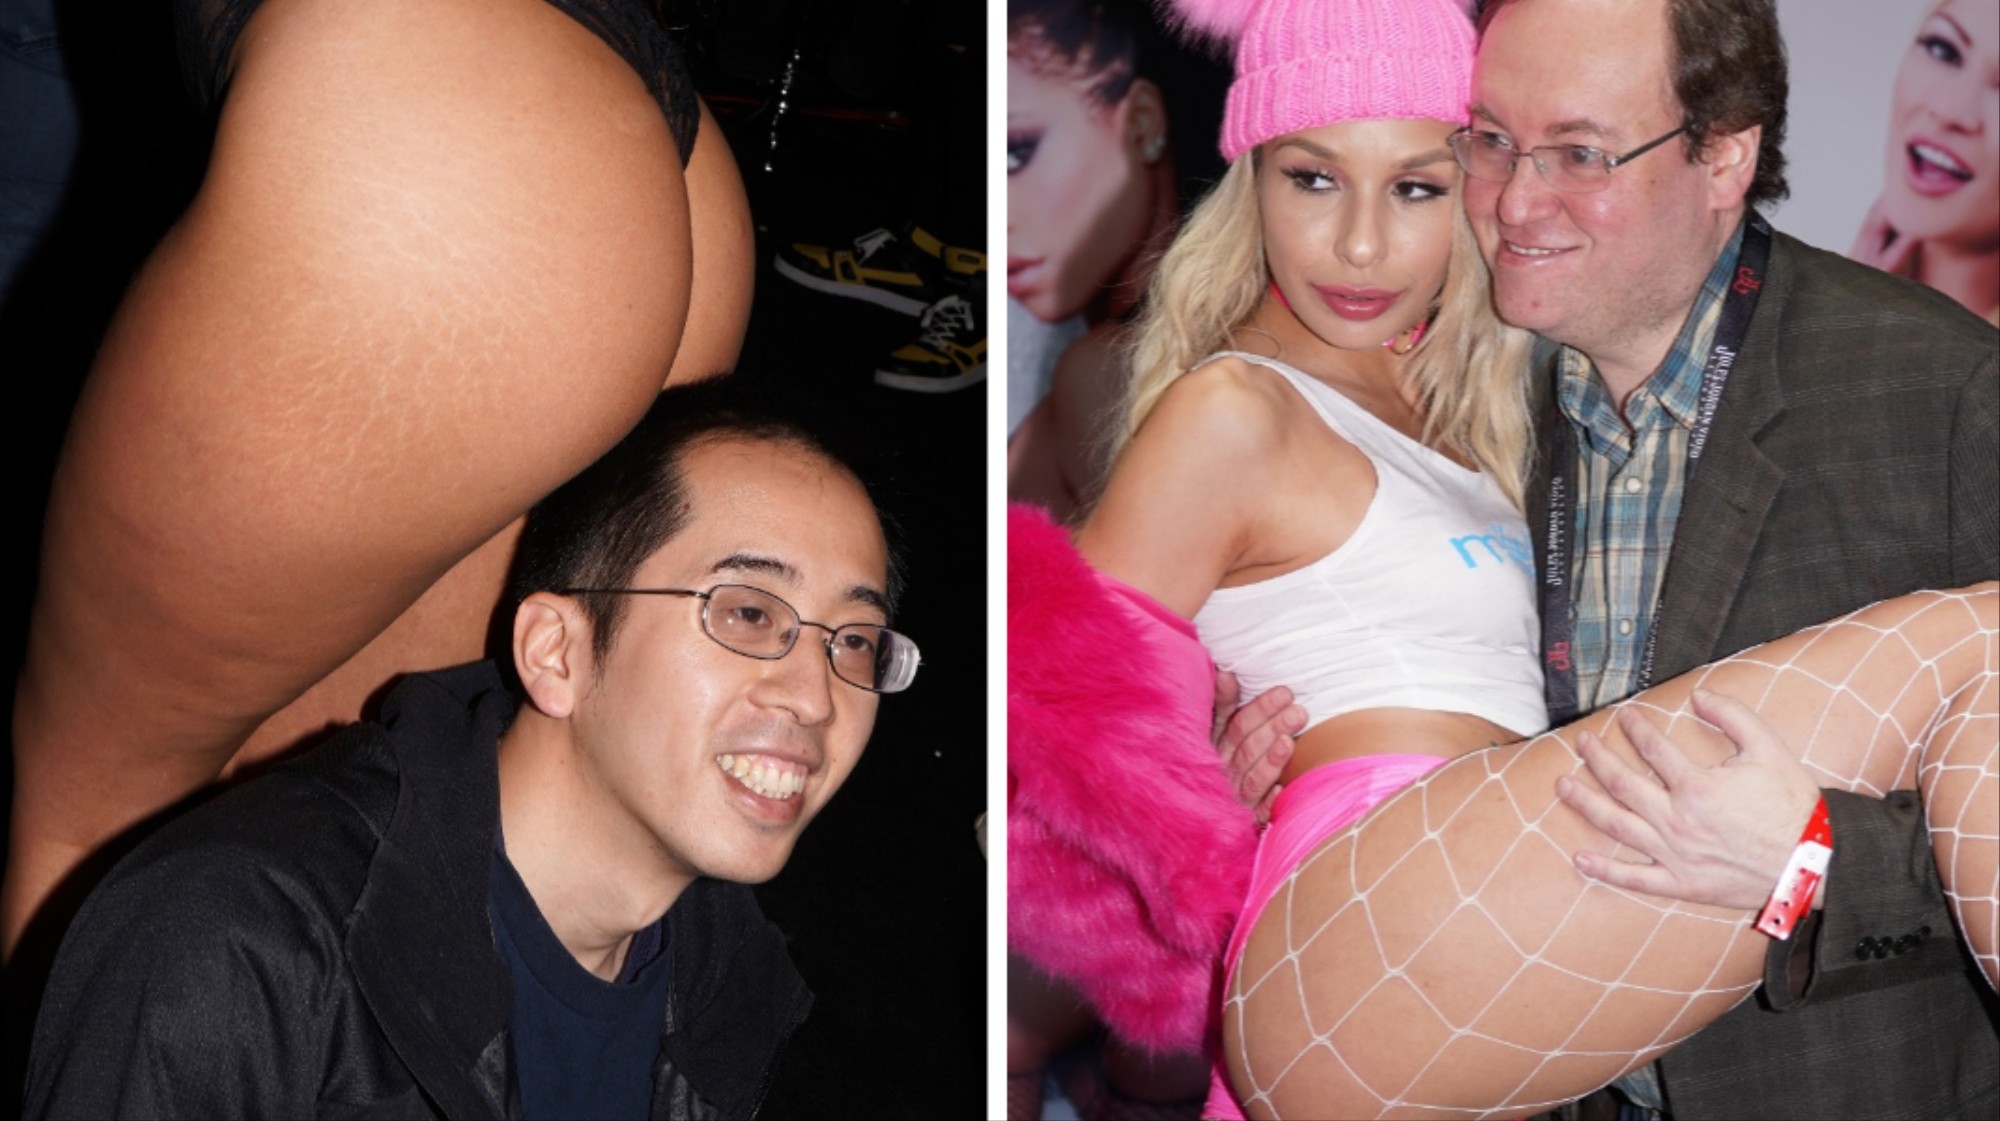 Photos of Porn Superfans at the World's Biggest Porn Event ...